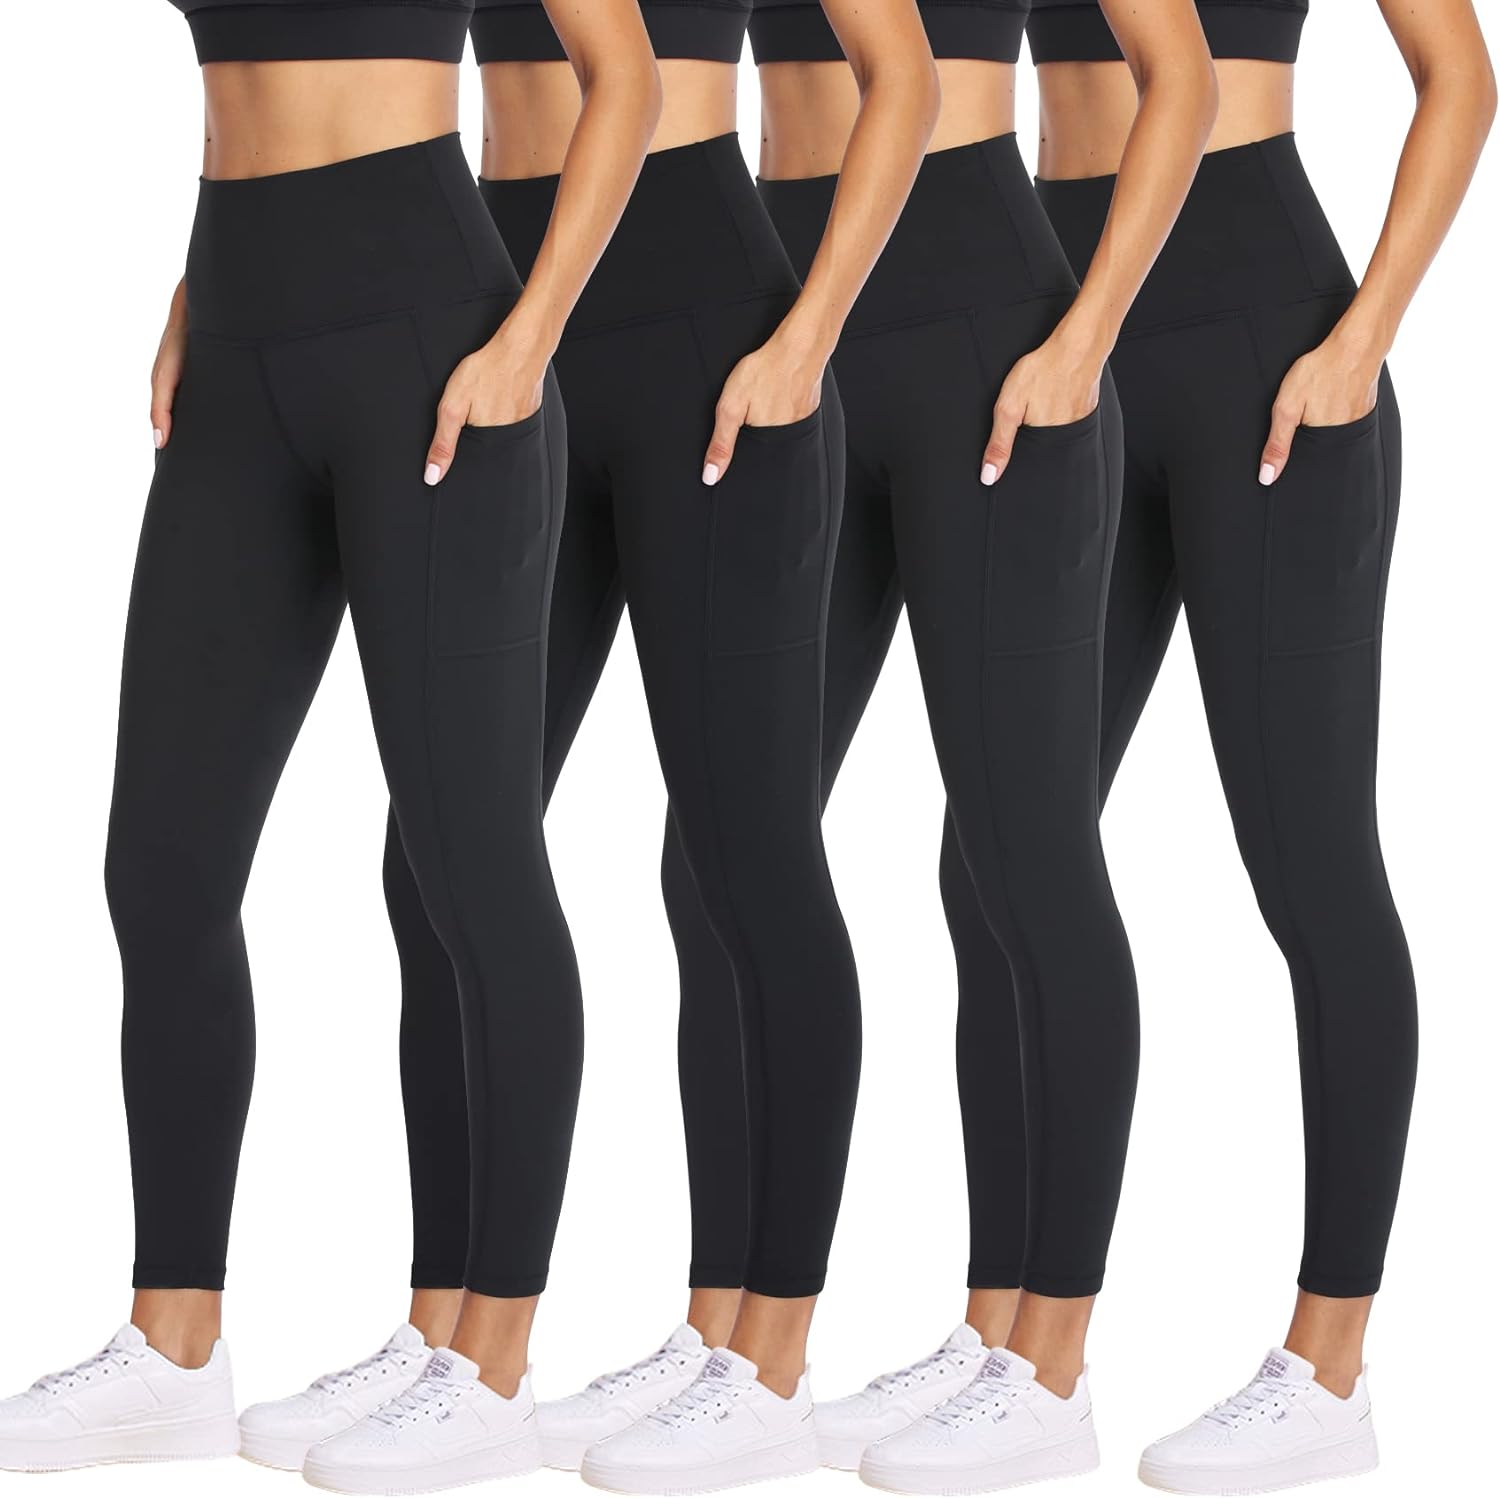 NexiEpoch 4 Pack Leggings for Women with Pockets- High Waisted Tummy Control for Workout Running Yoga Pants Reg  Plus Size